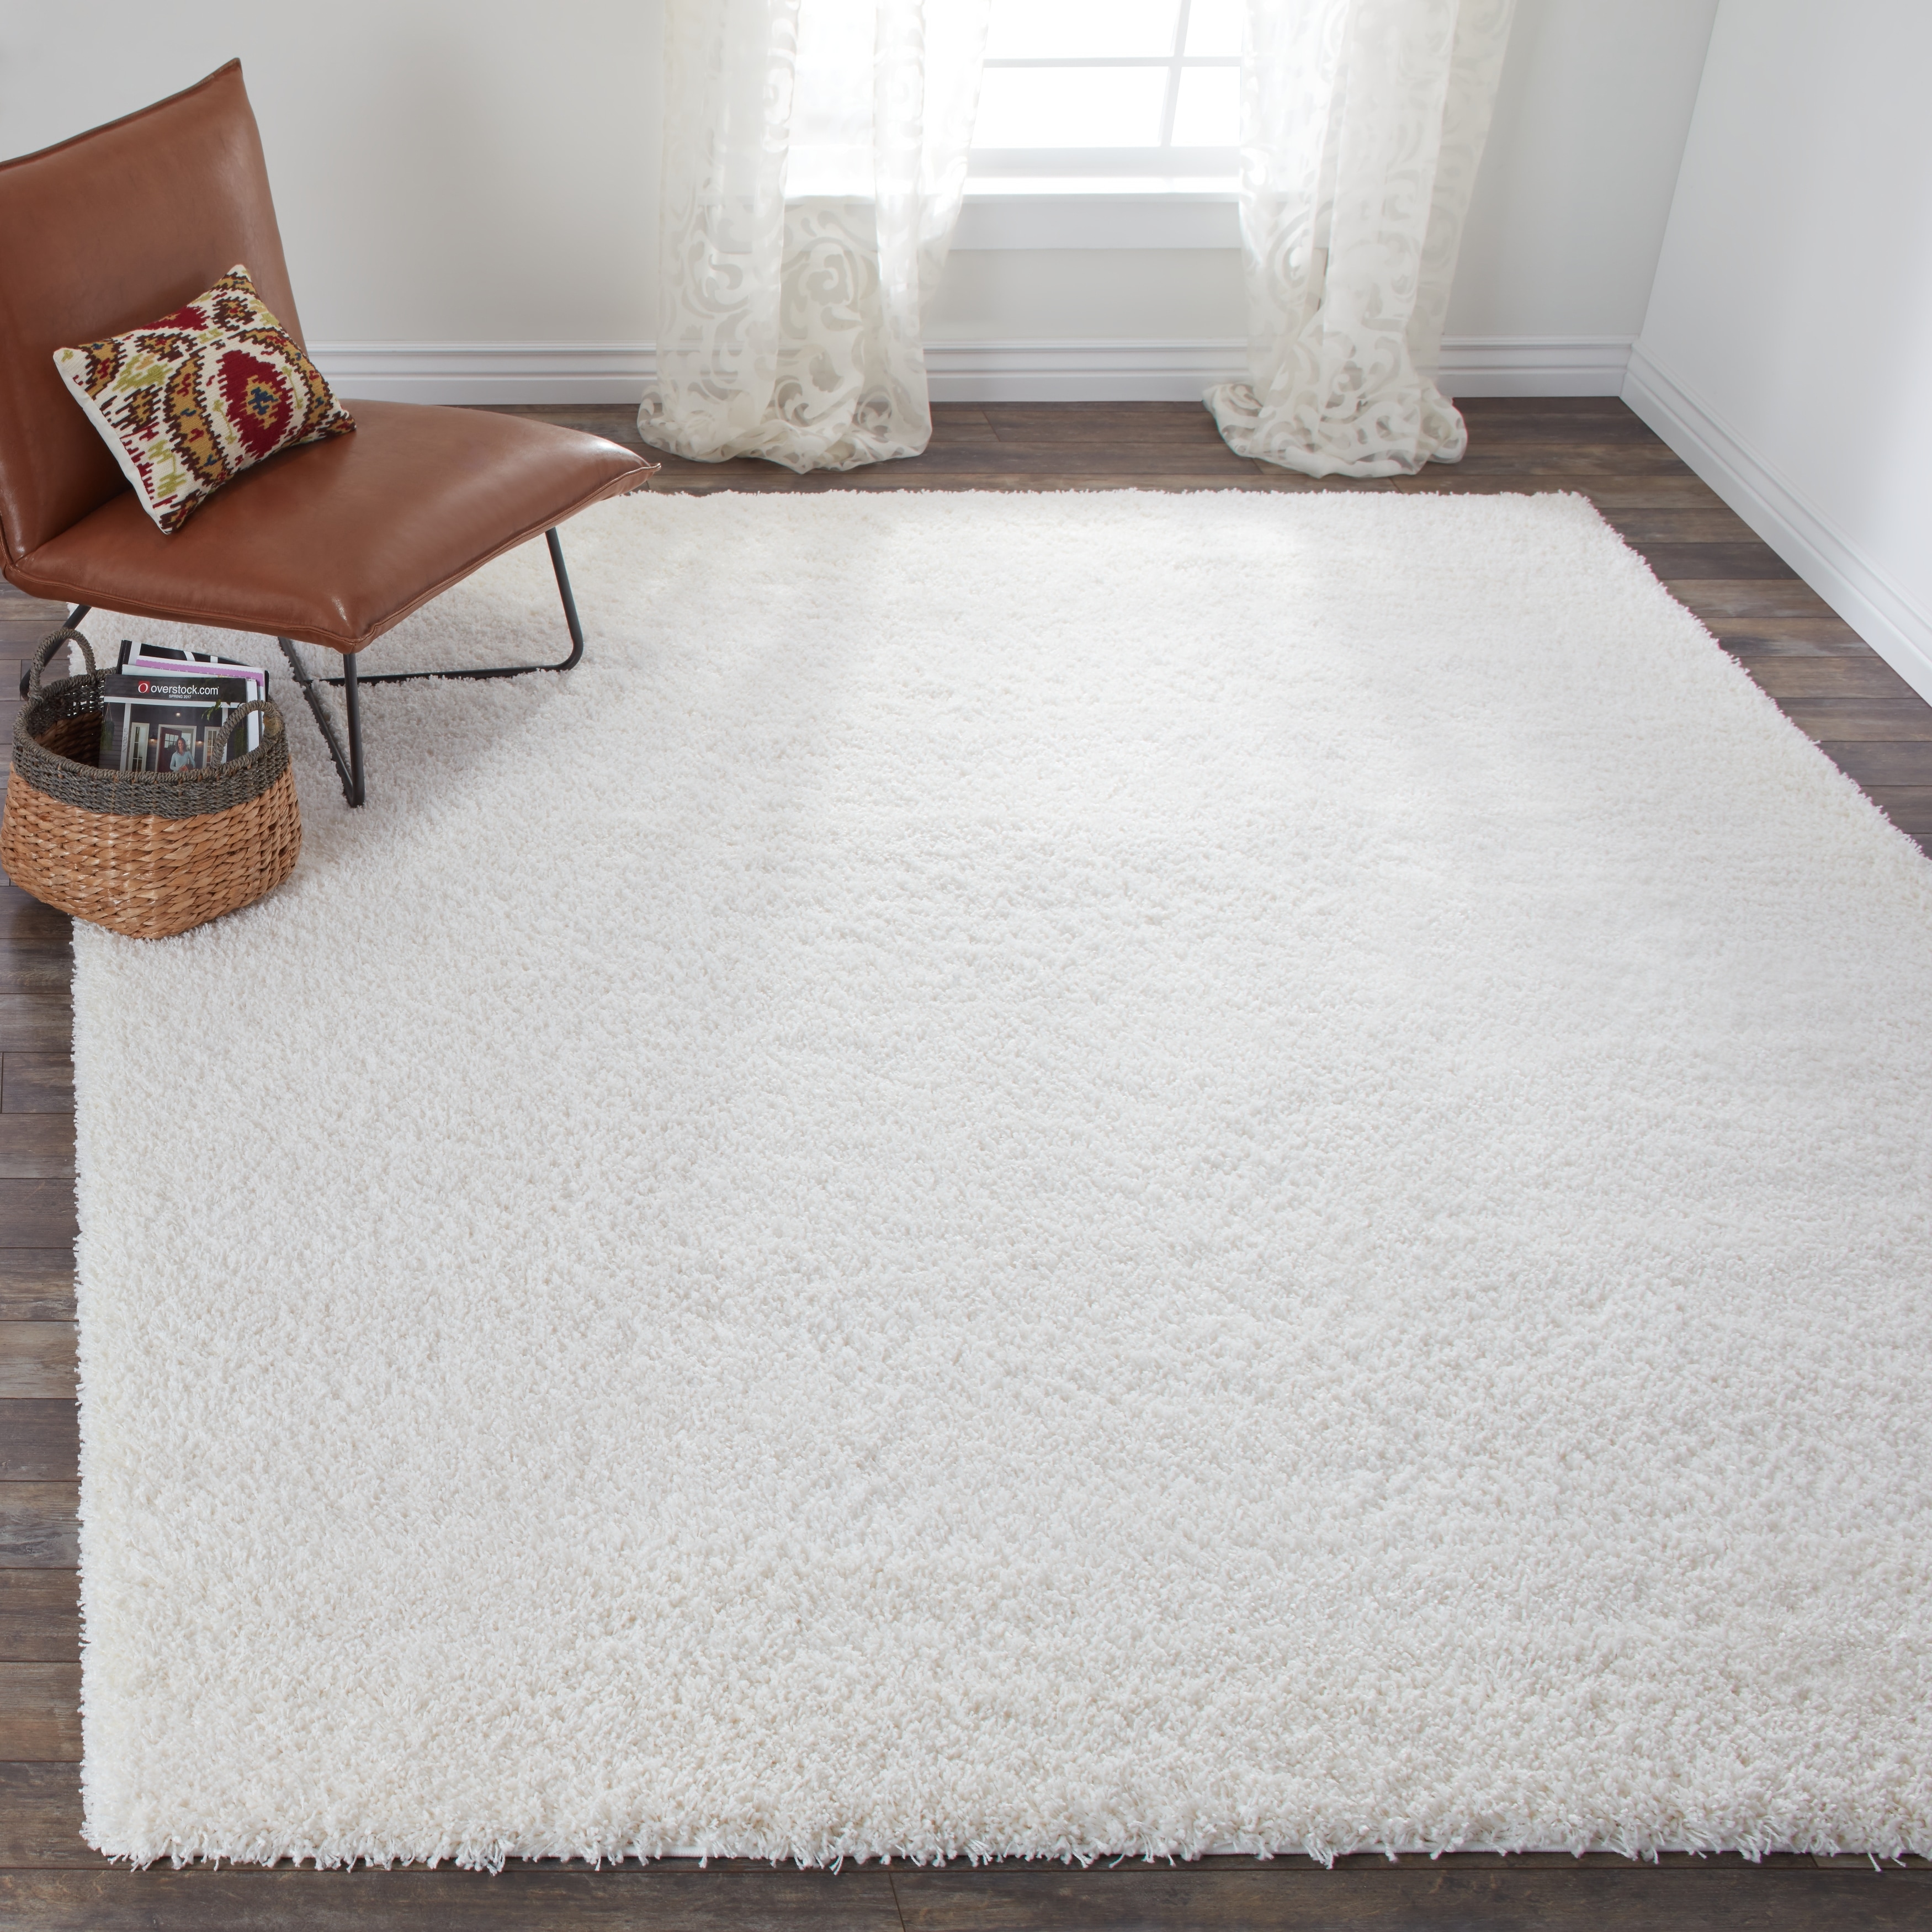 Buy Area Rugs Online At Overstockcom Our Best Rugs Deals